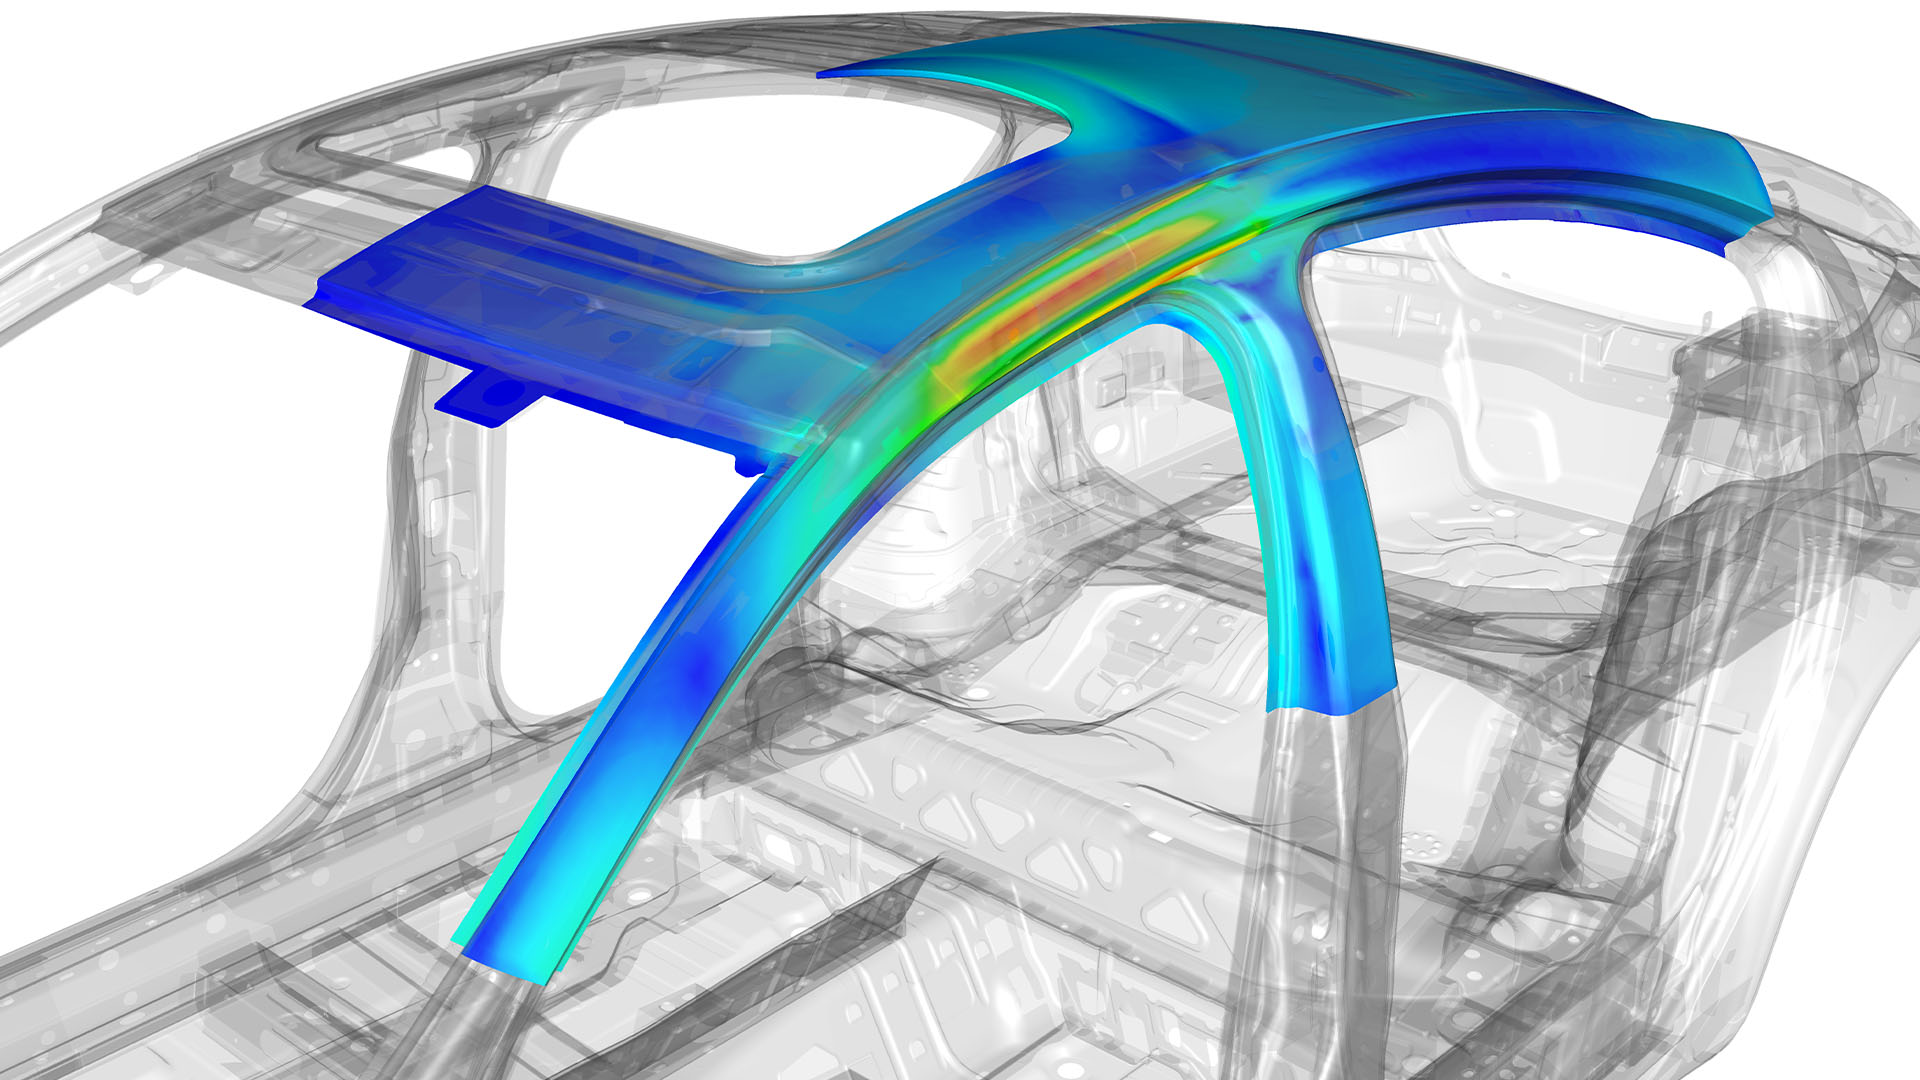 Automotive body roof crush simulation with Simcenter Nastran